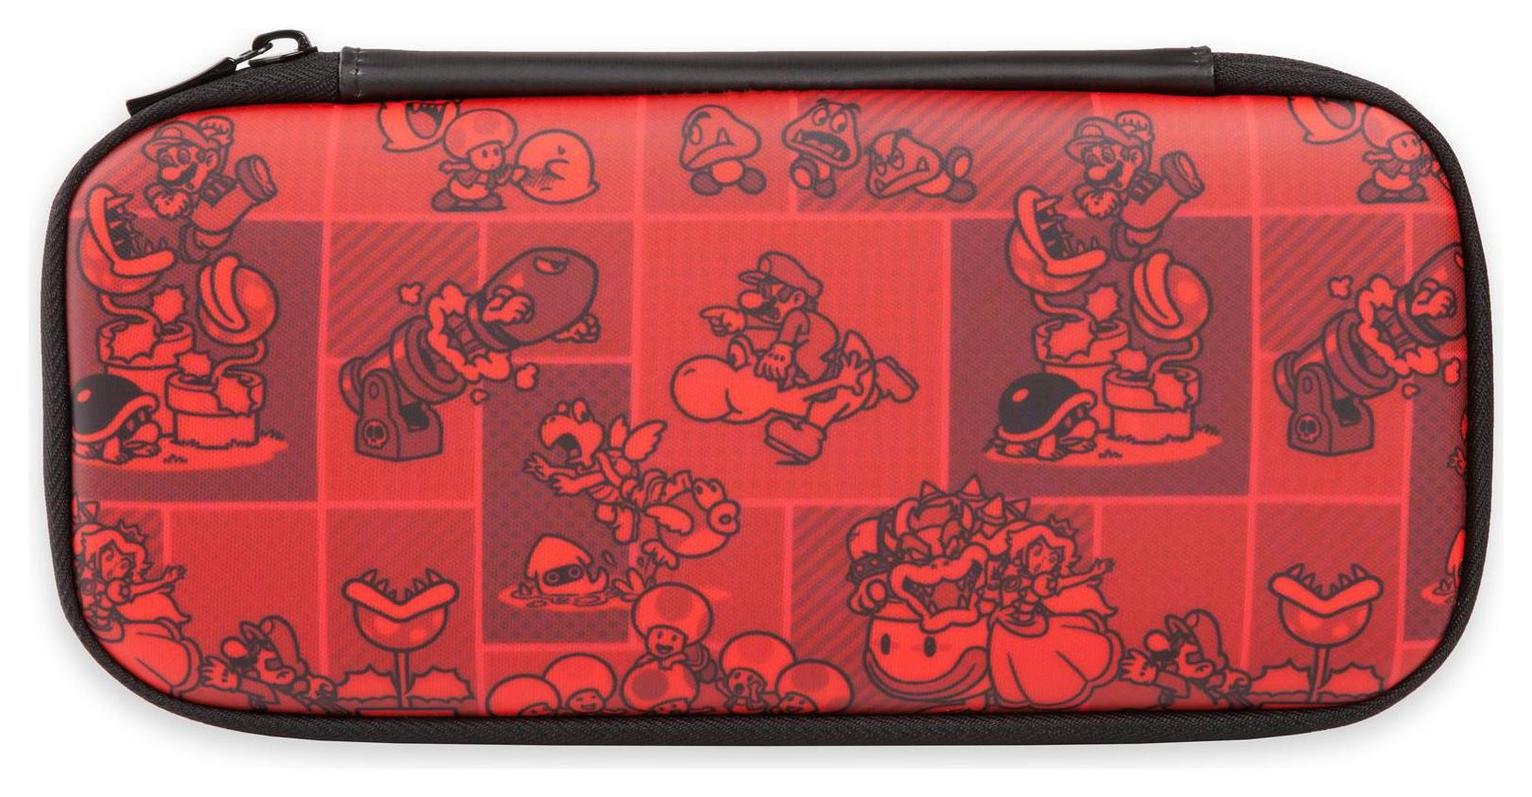 Stealth Case for Nintendo Switch - Super Mario Red 